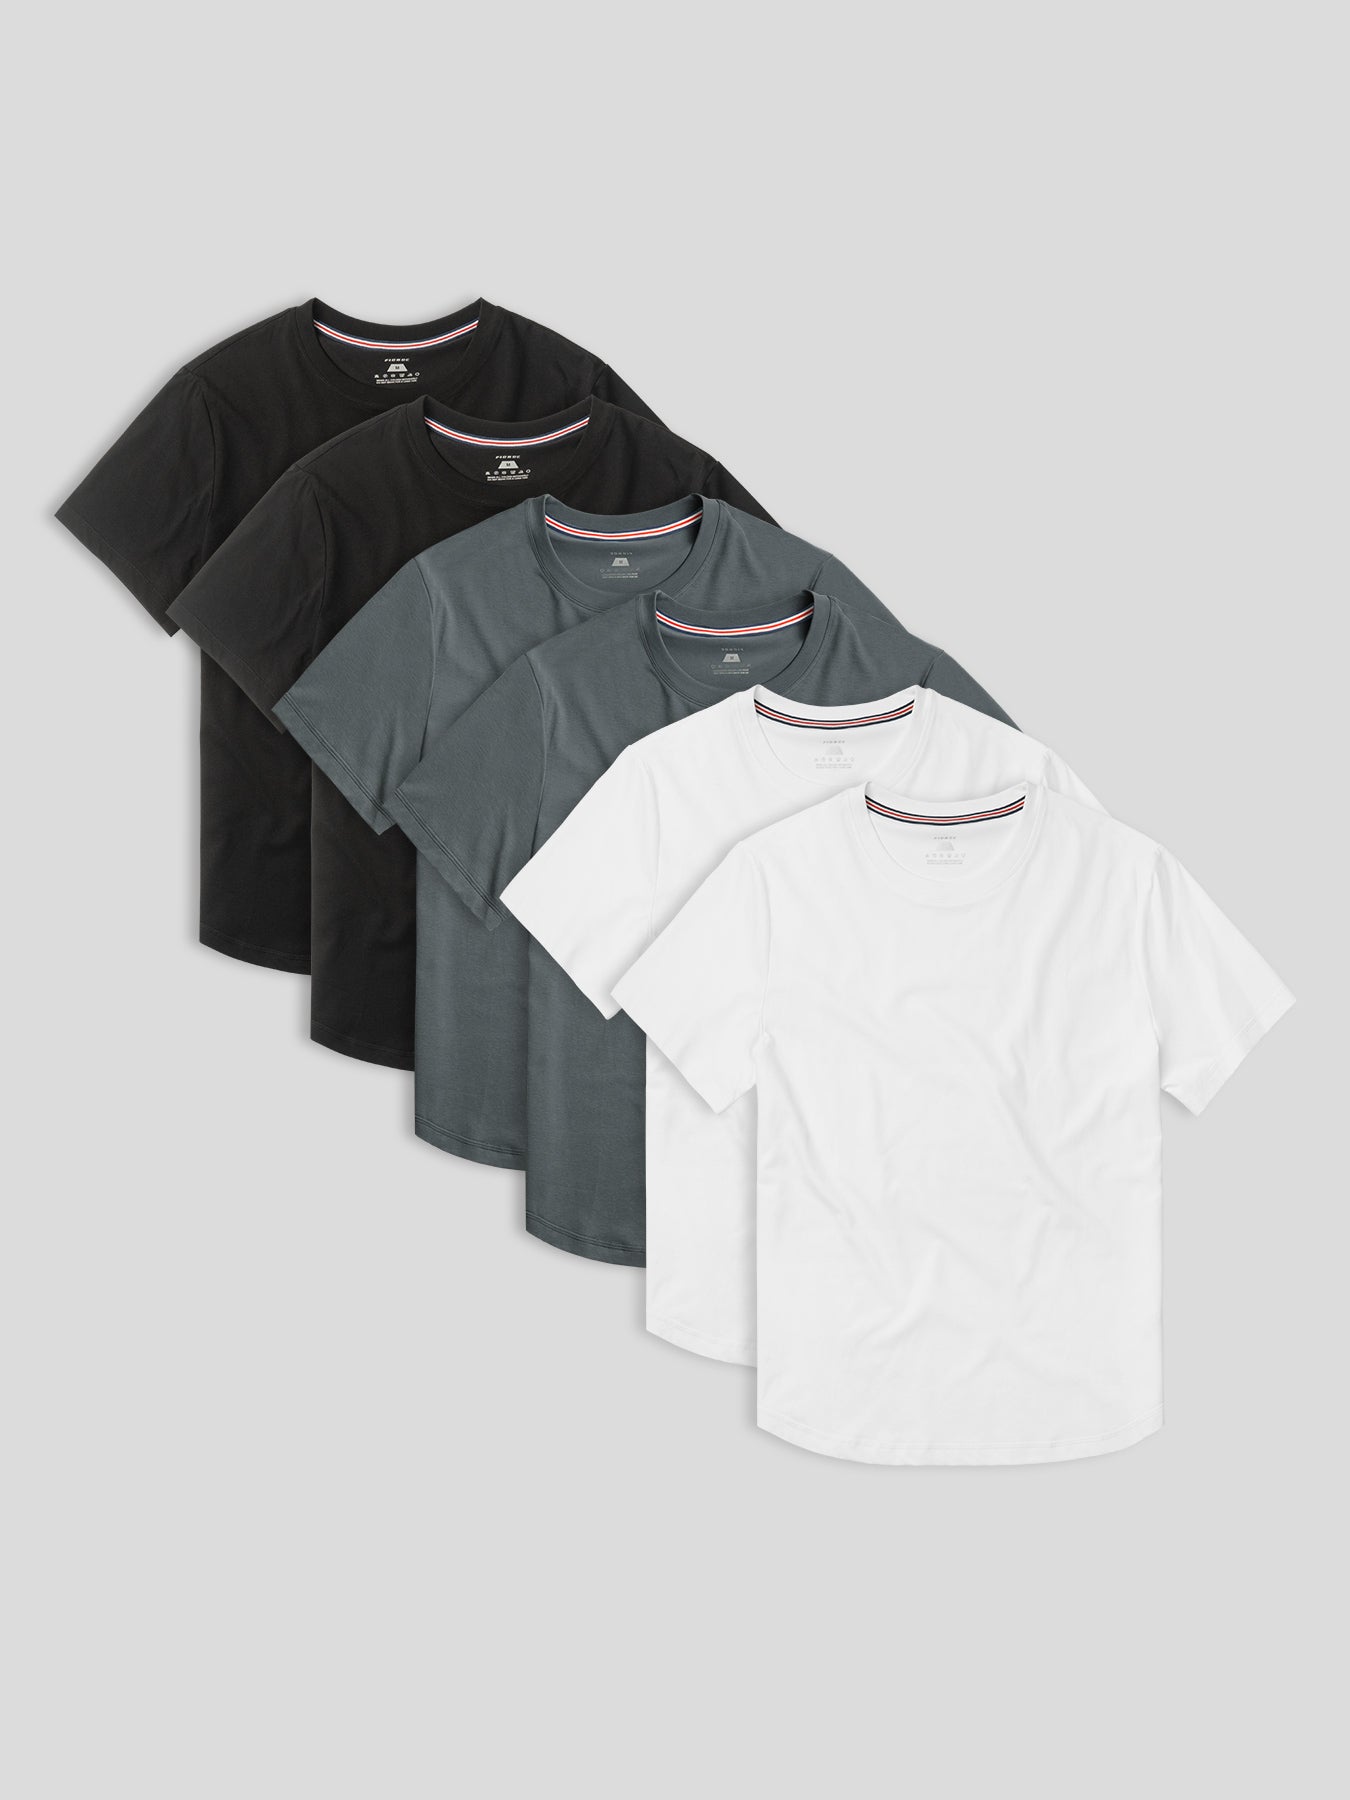 StayCool 2.0 Classic Fit Tee Multicolor 6-Pack